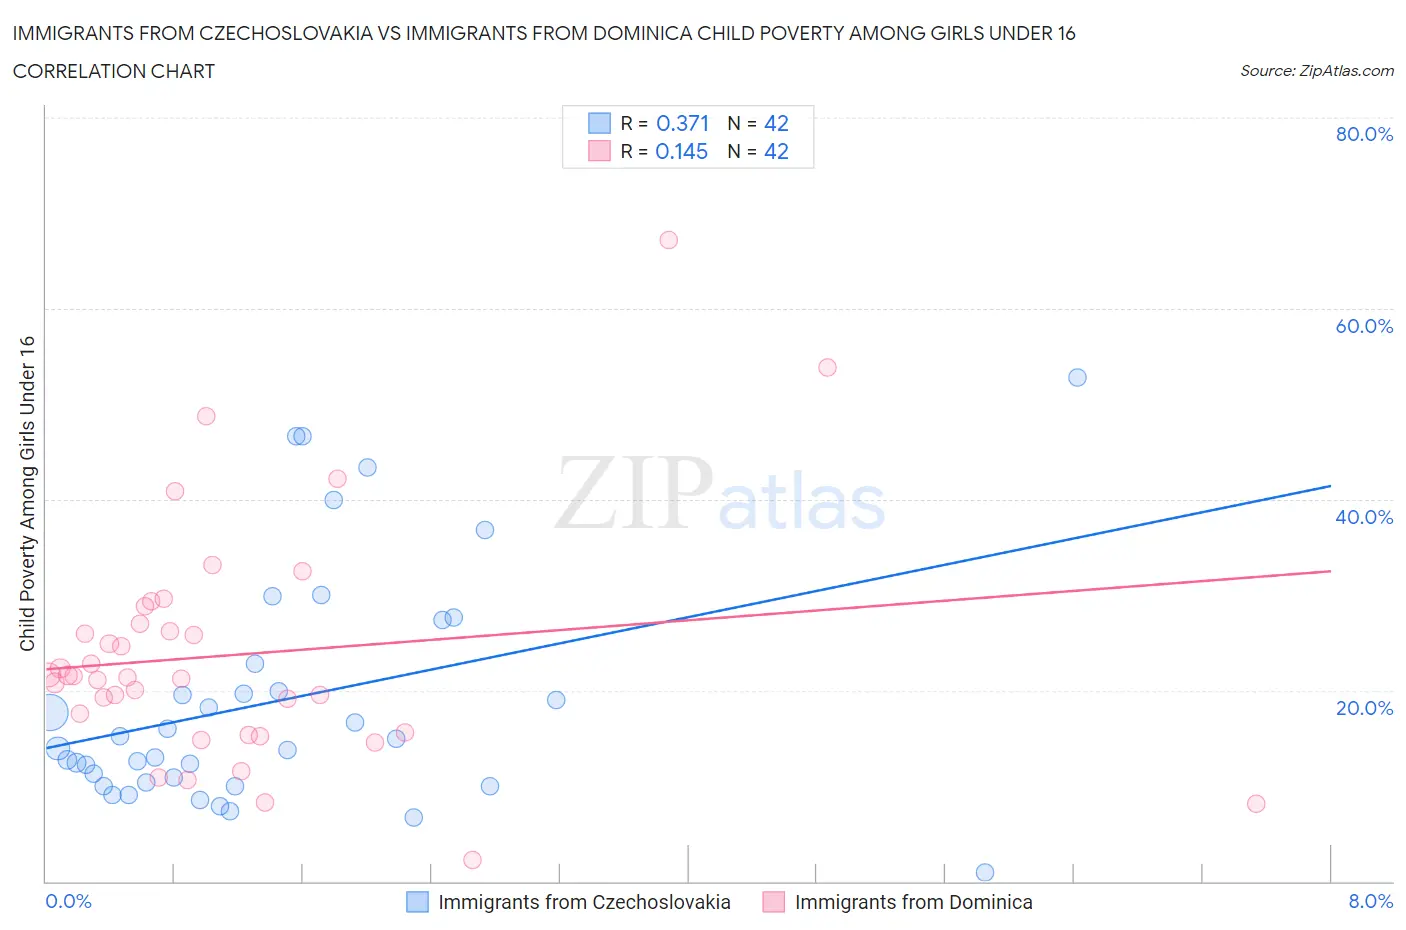 Immigrants from Czechoslovakia vs Immigrants from Dominica Child Poverty Among Girls Under 16